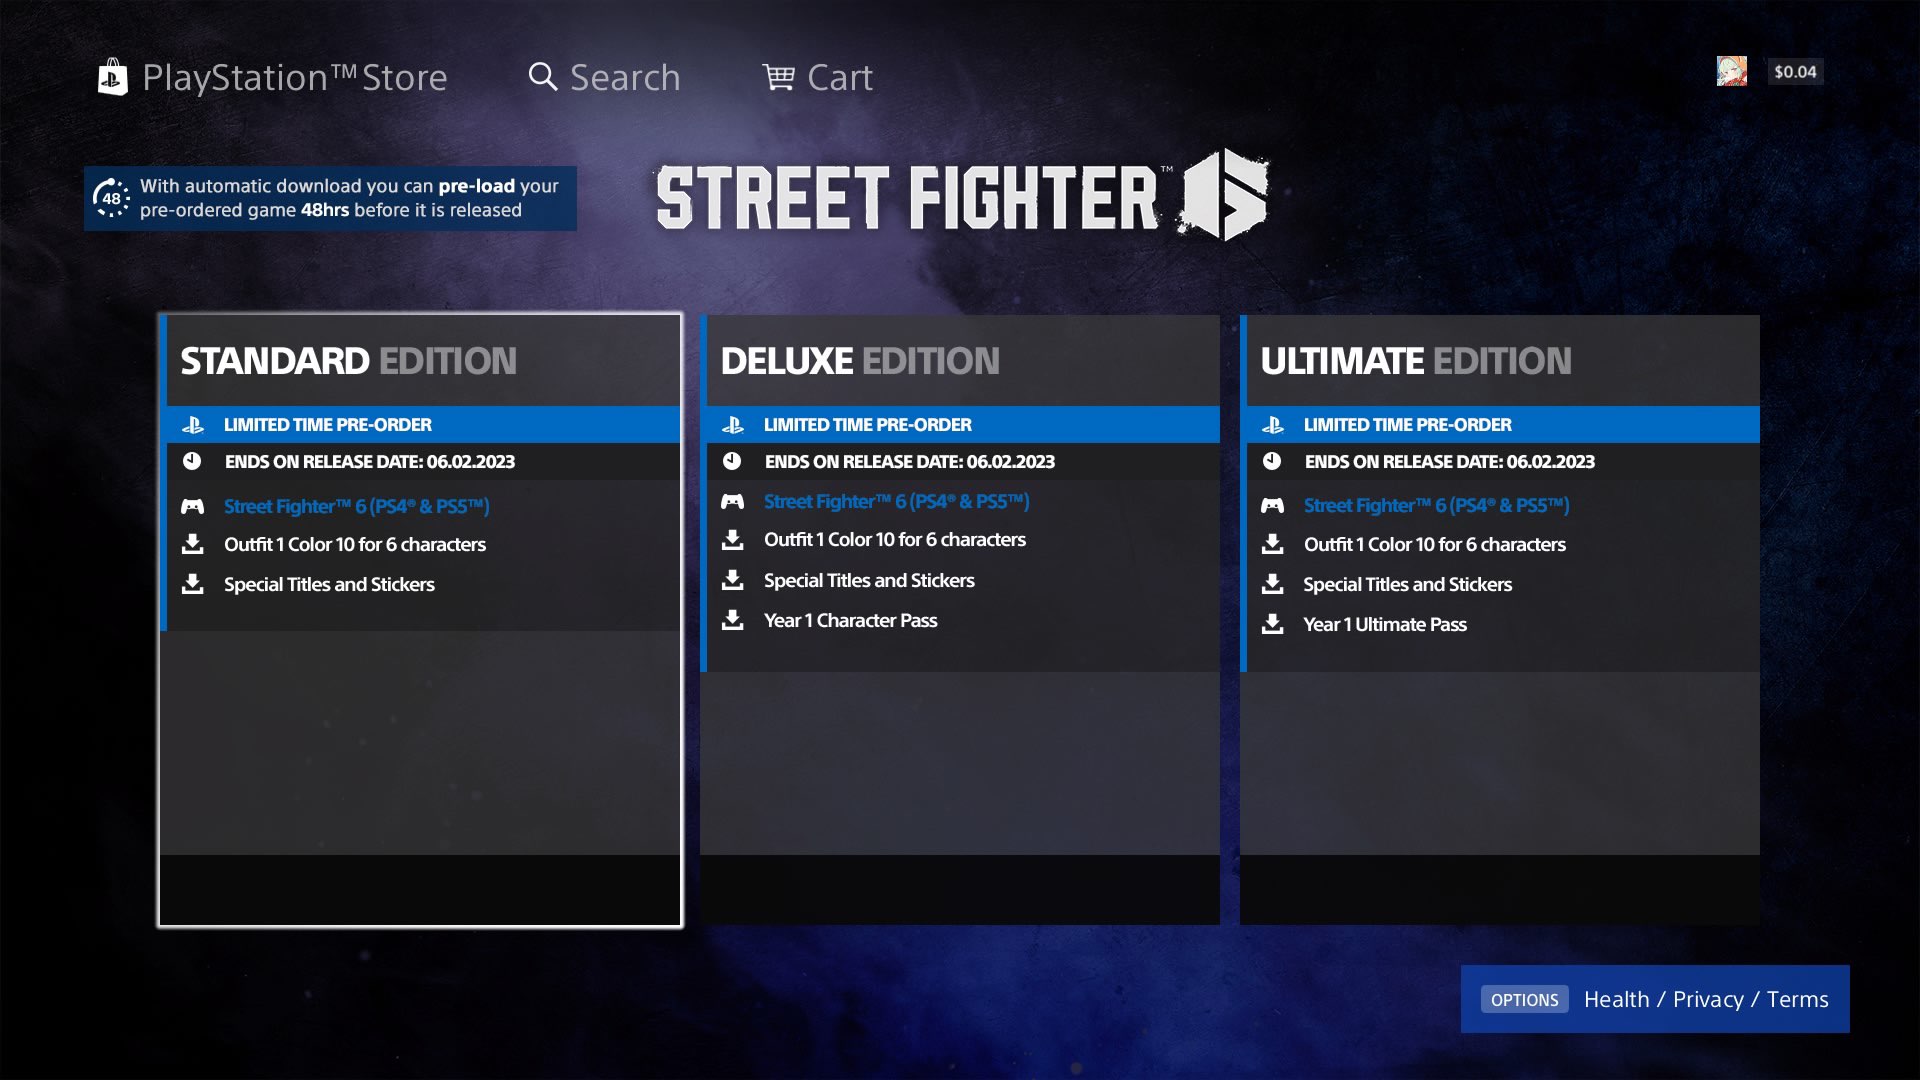 Street Fighter 6 will be released on June 2, 2023 according to PlayStation Store